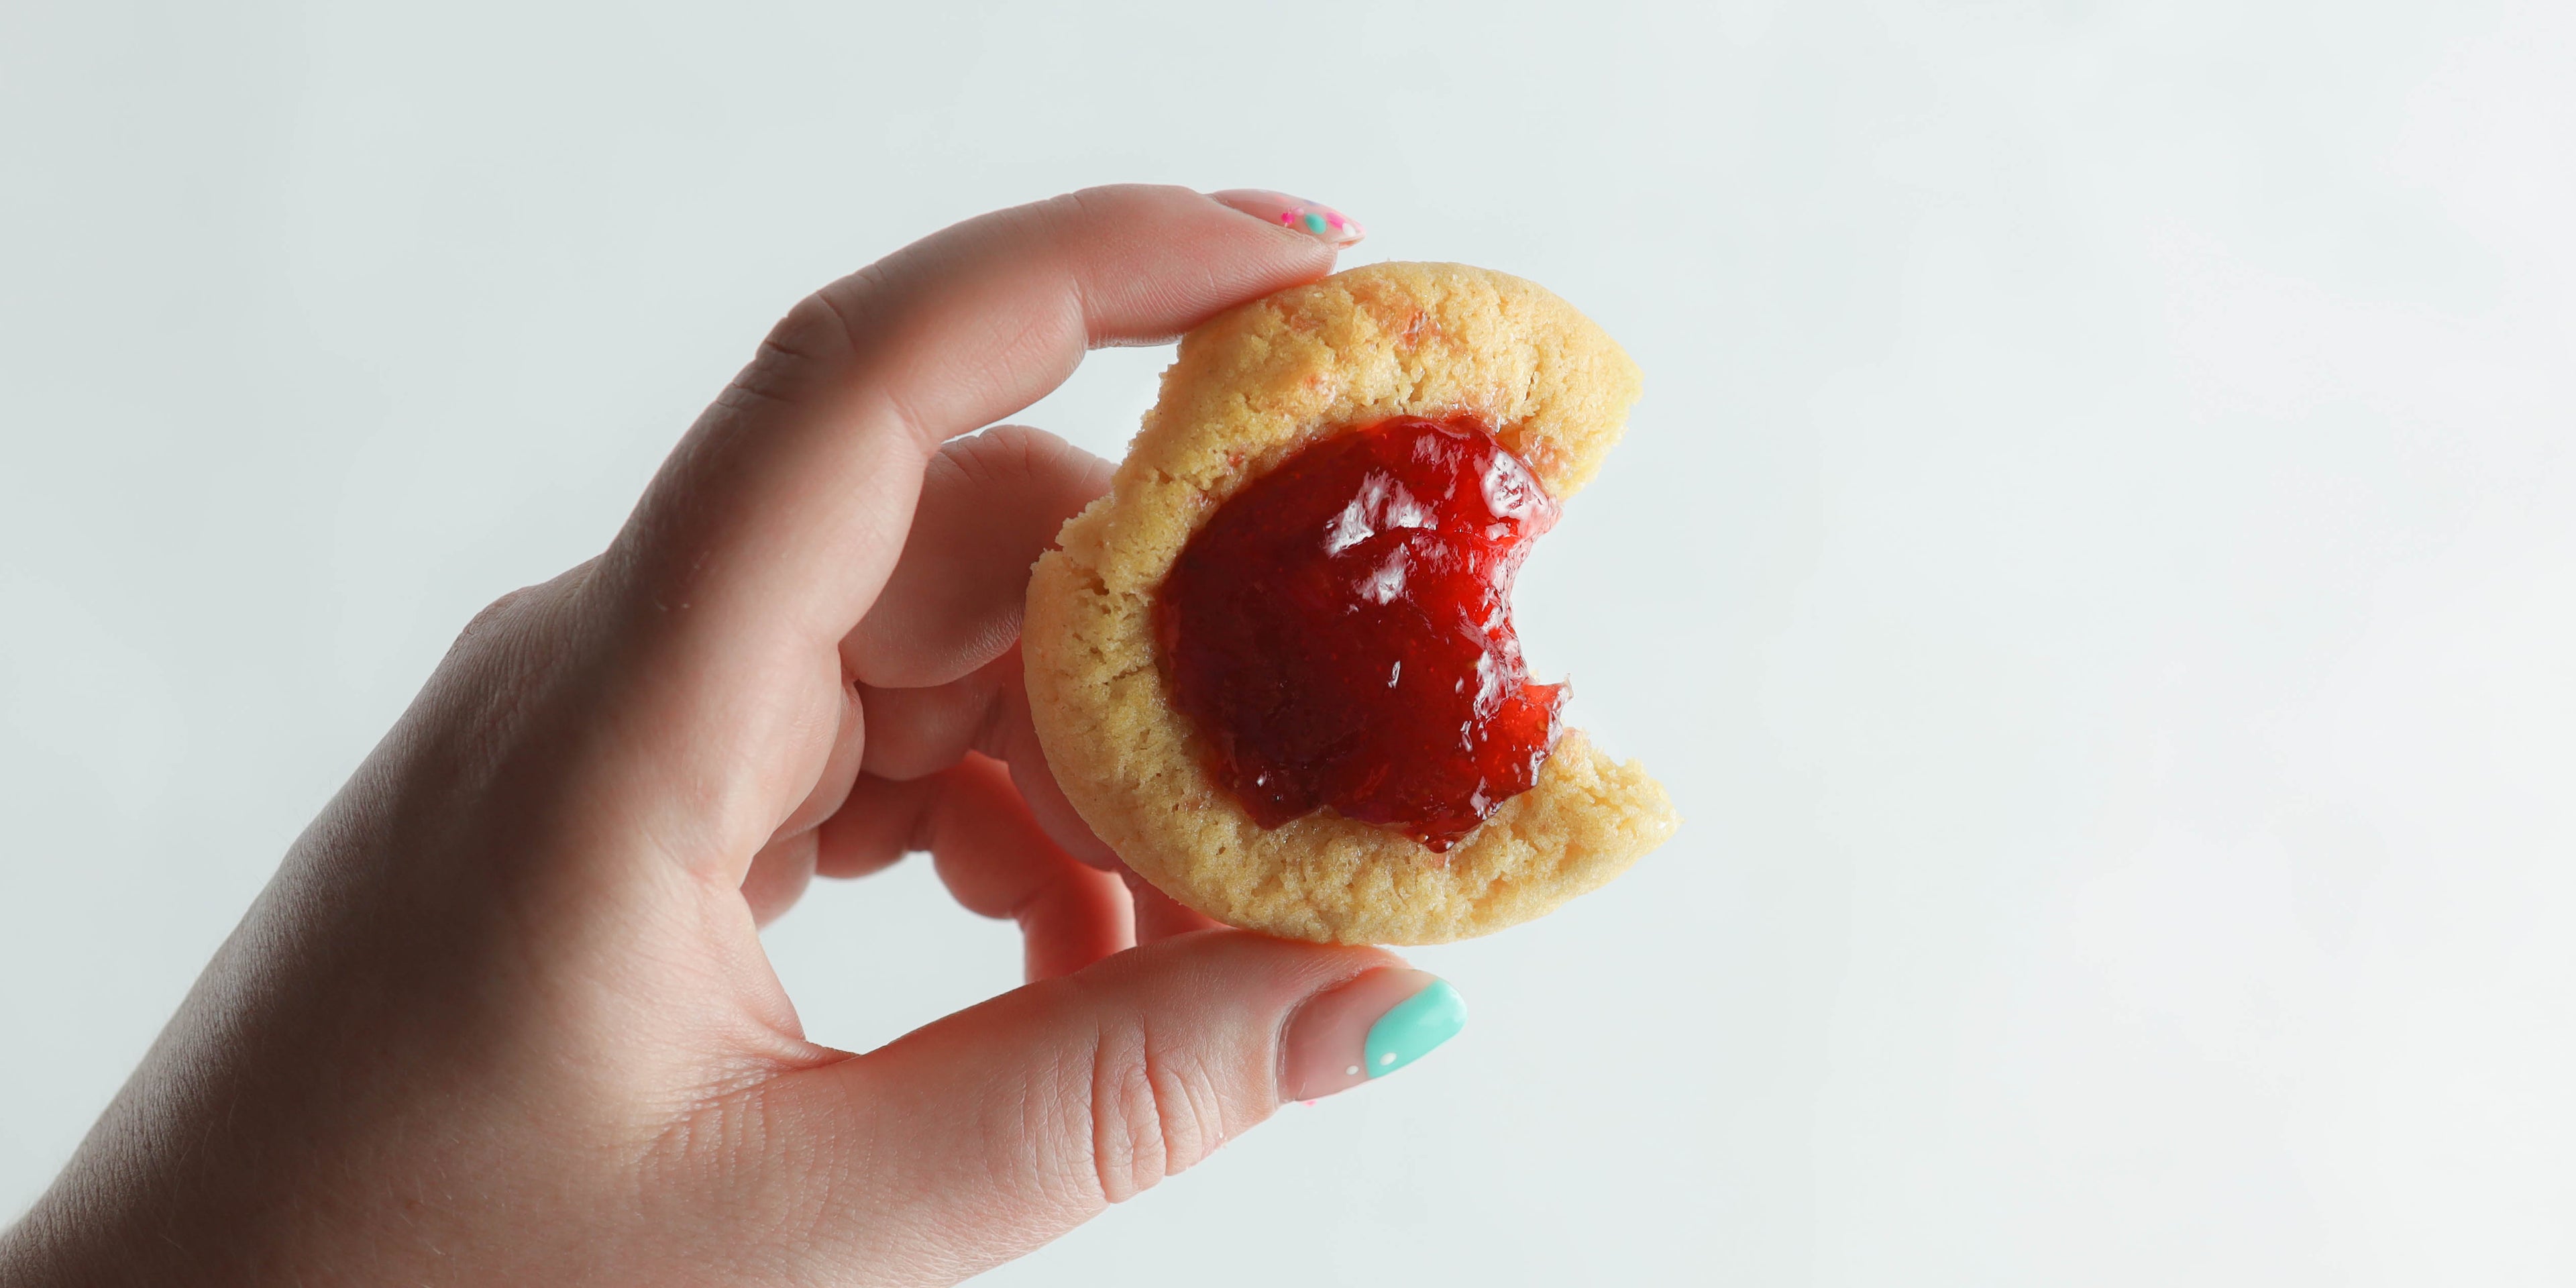 Hand holding biscuit with jam in it and a bite taken out